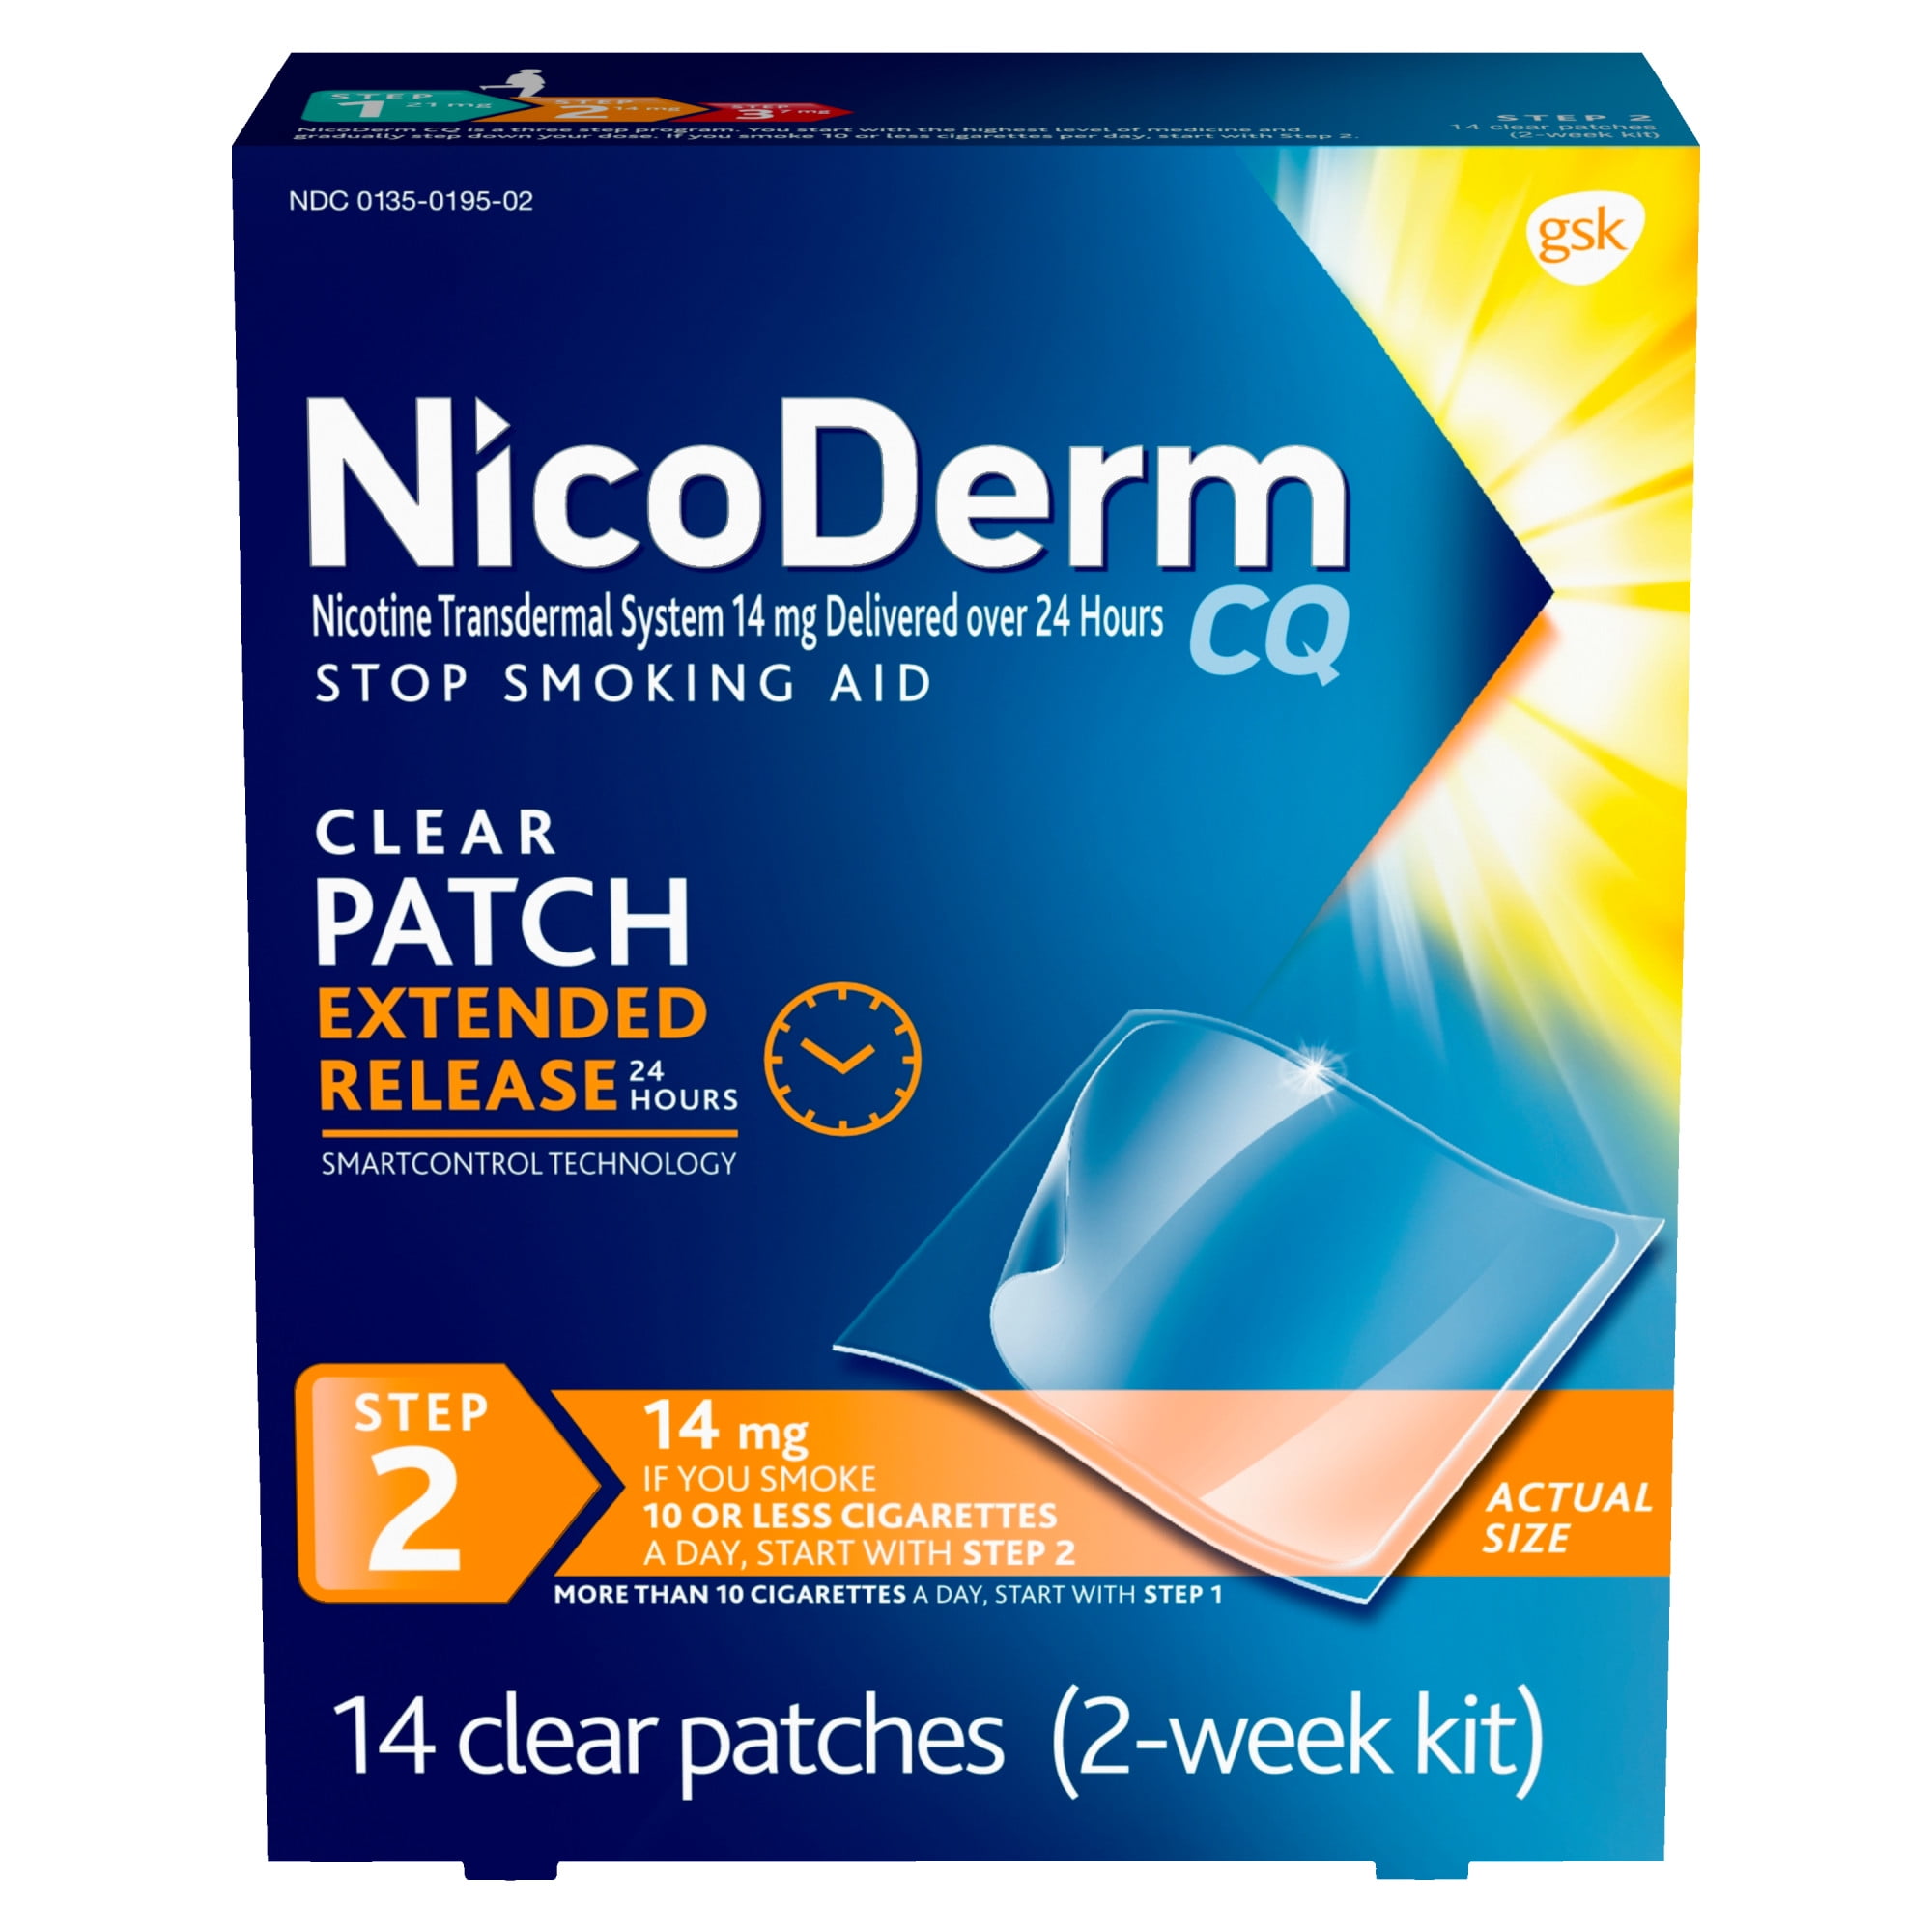 nicoderm-cq-step-2-extended-release-nicotine-patches-to-quit-smoking